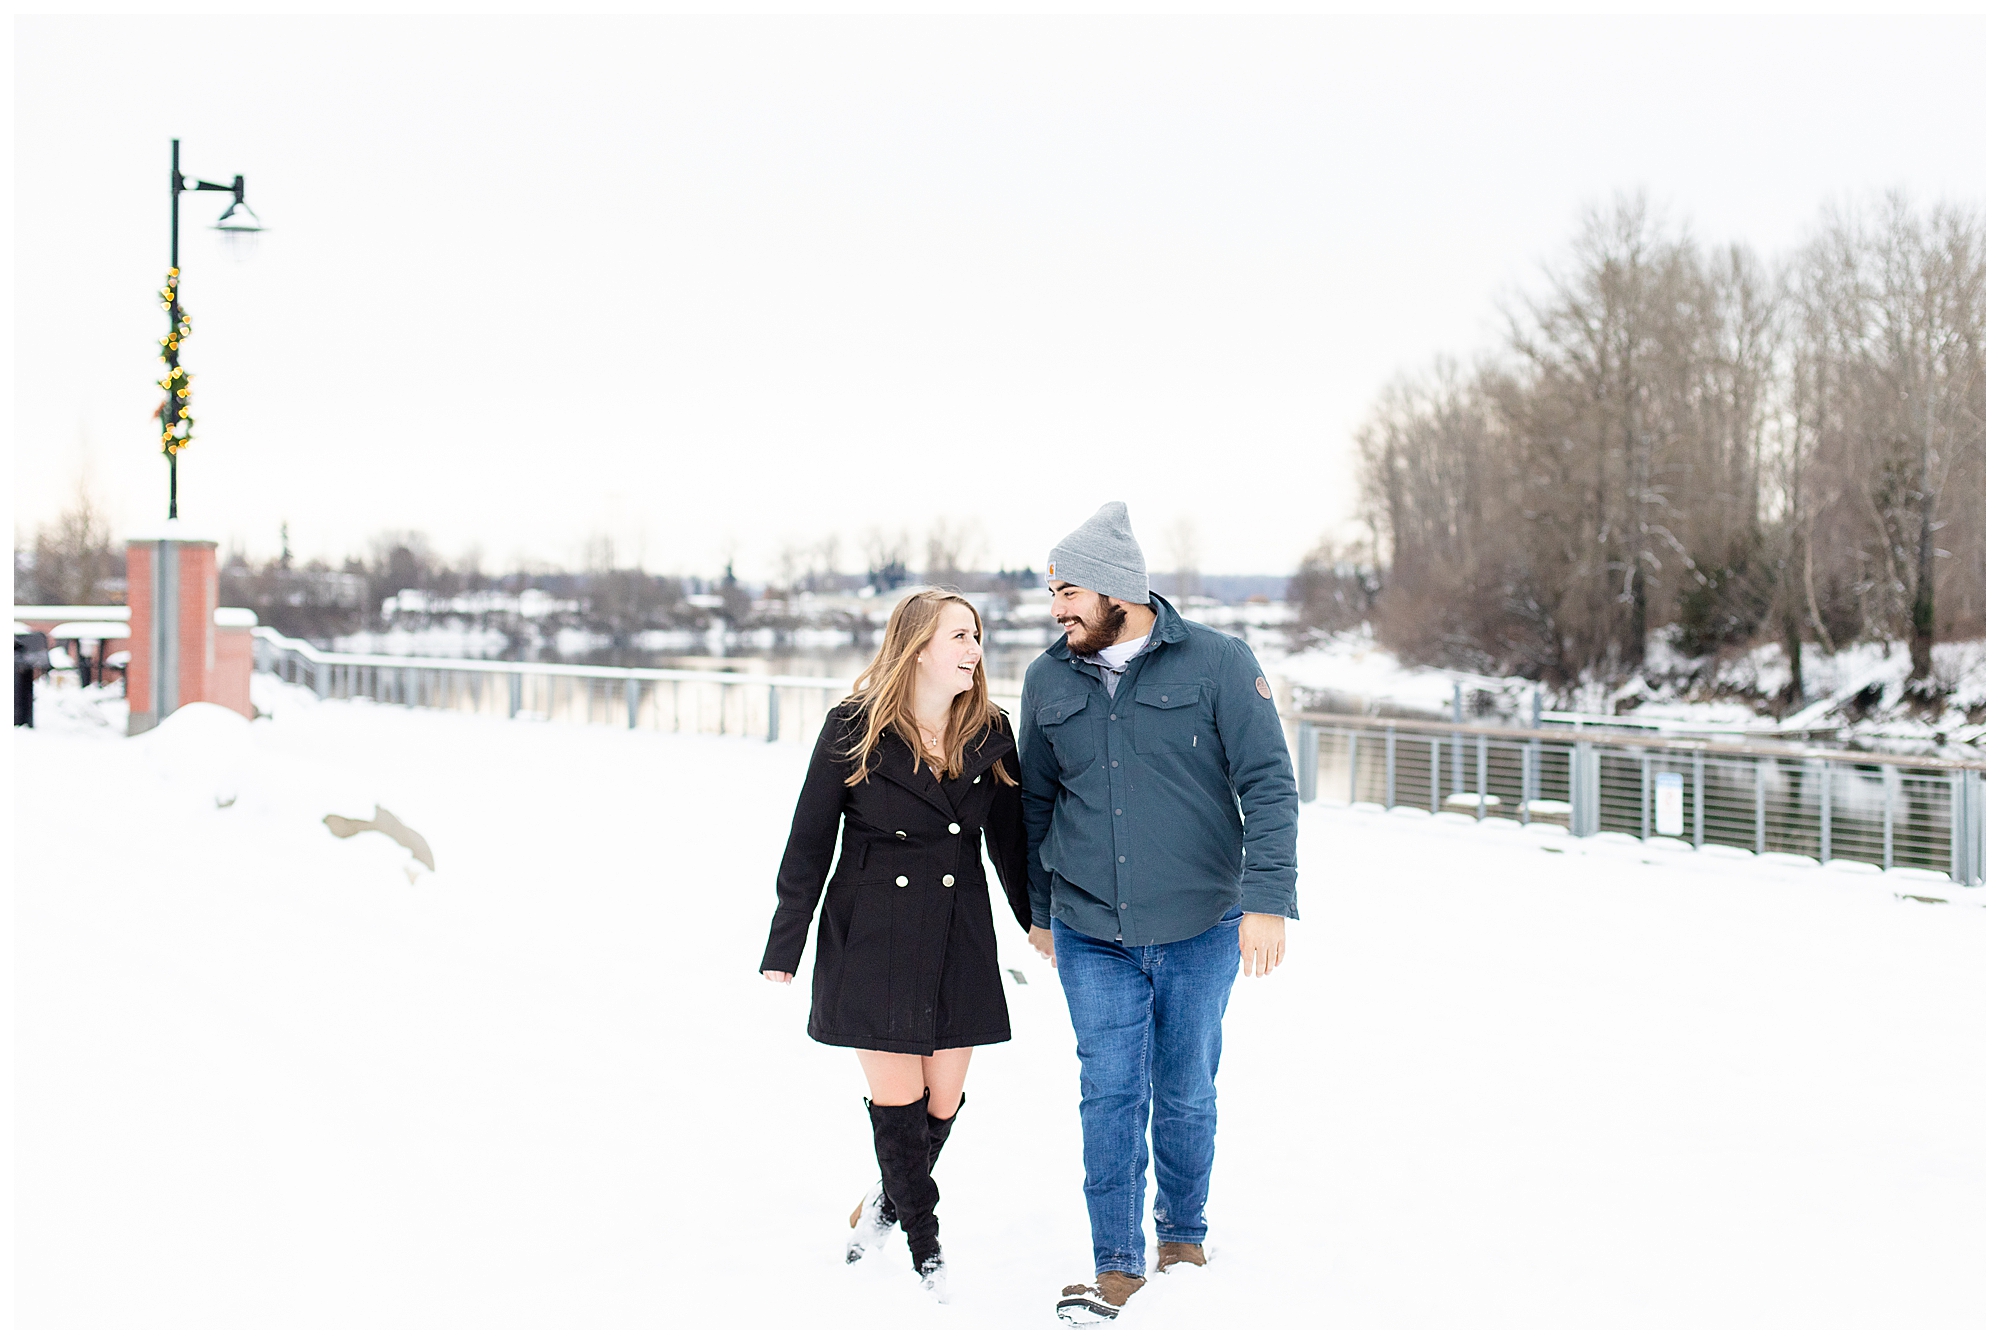 engagement photos in the snow with couple walking and smiling at each other